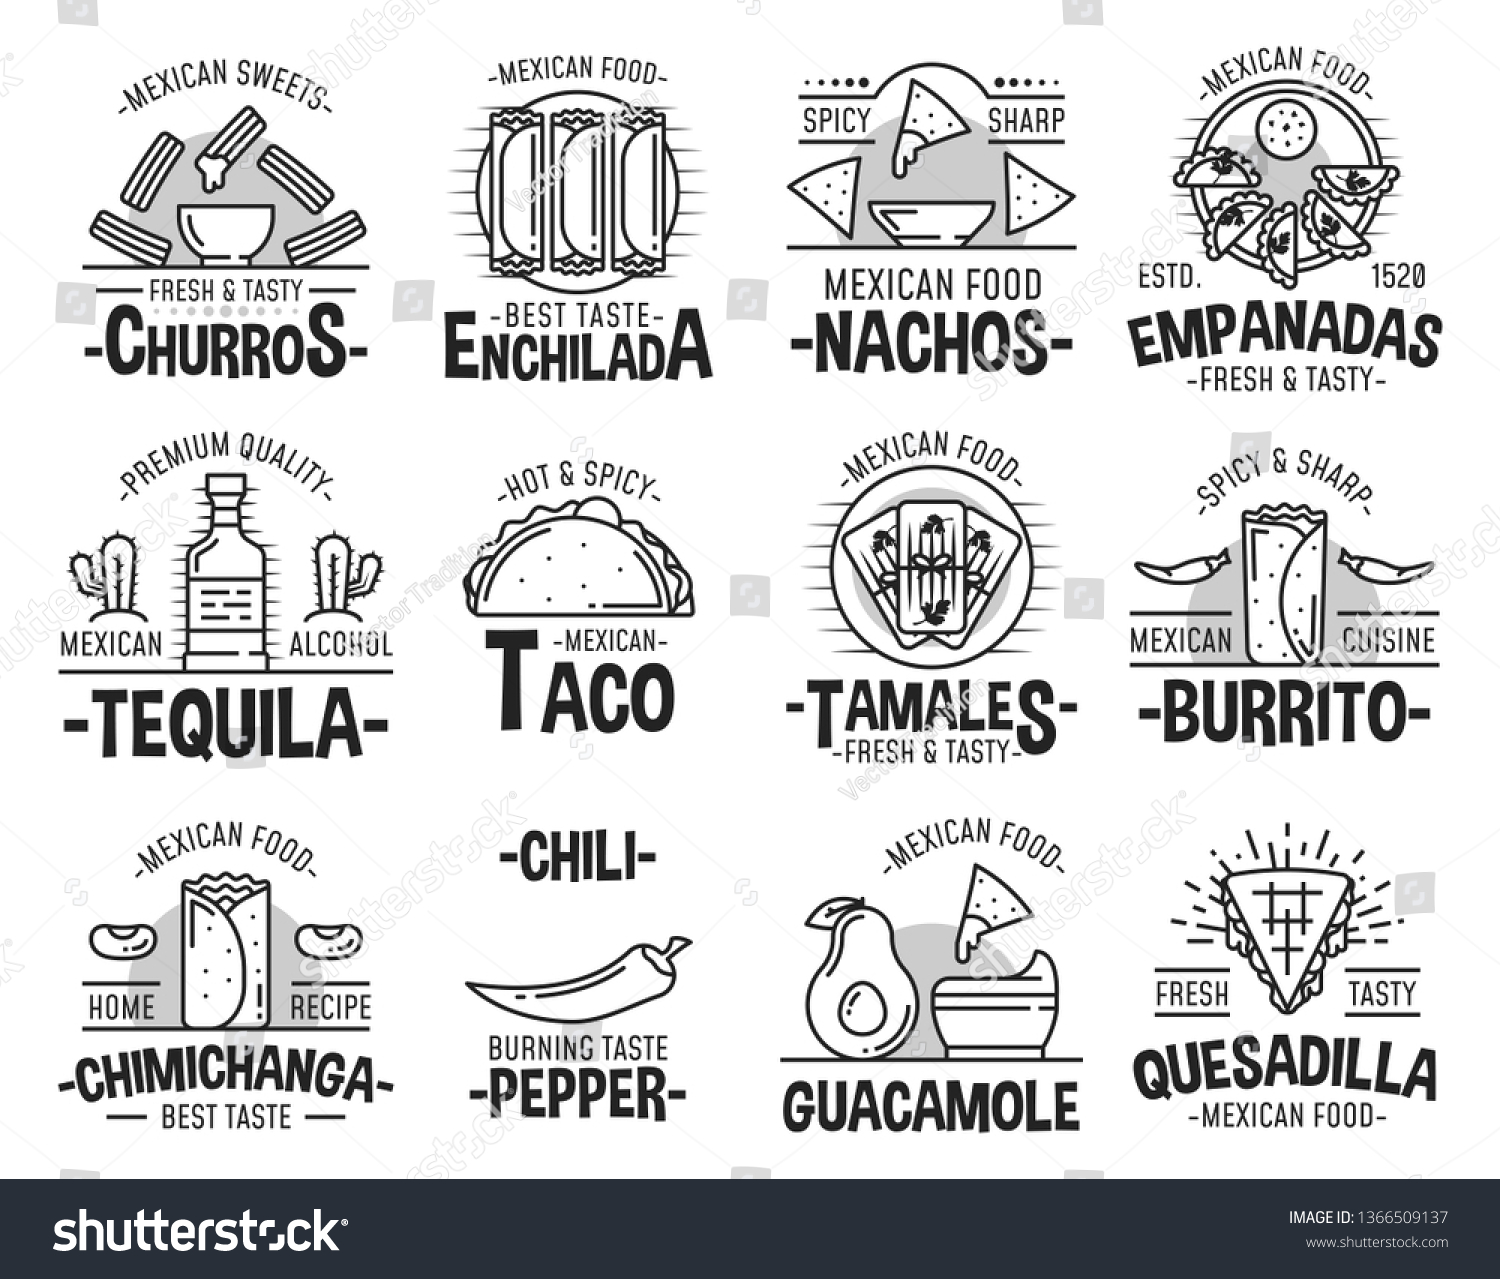 SVG of Mexican cuisine restaurant or cafe icons. Vector sweet churros dessert, taco or burrito and quesadilla, nachos with avocado guacamole salsa and cimichanga, tequila and enchilada svg